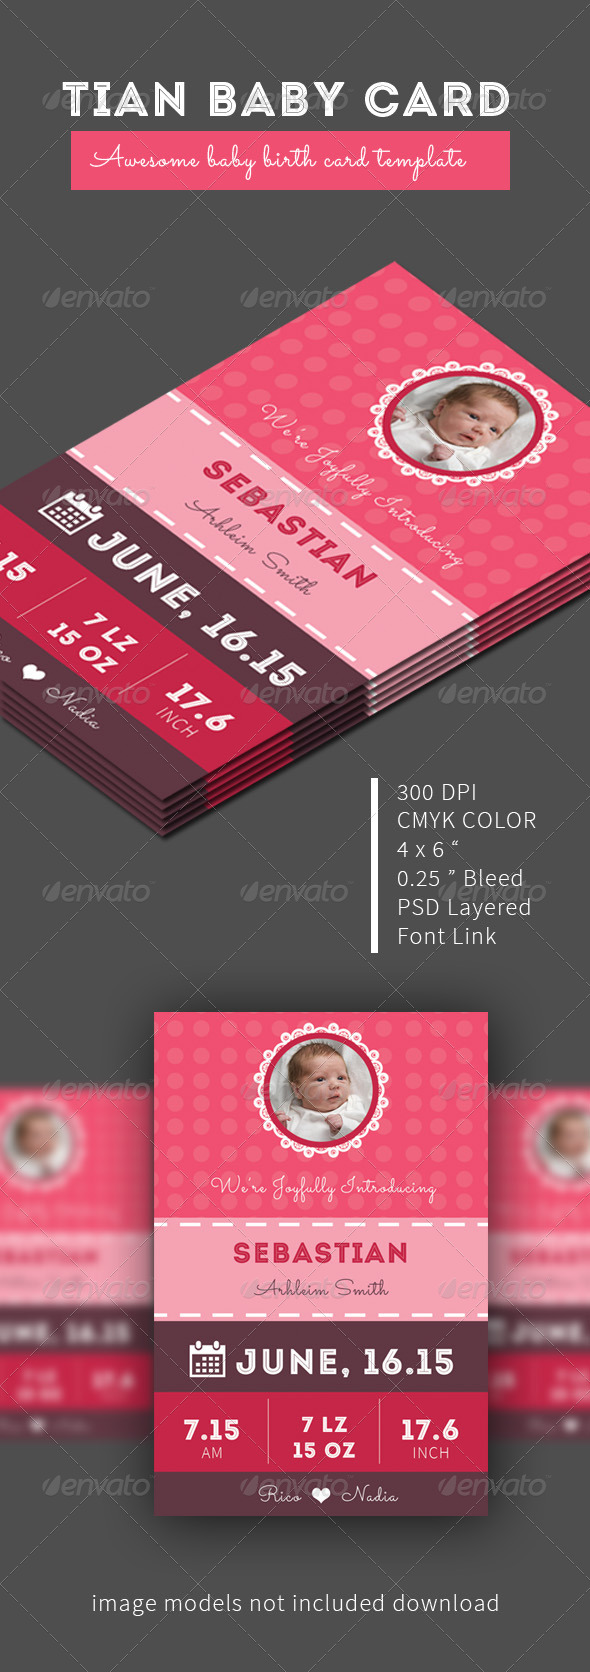 25+ PSD Print Templates Cards and Invites Weddings